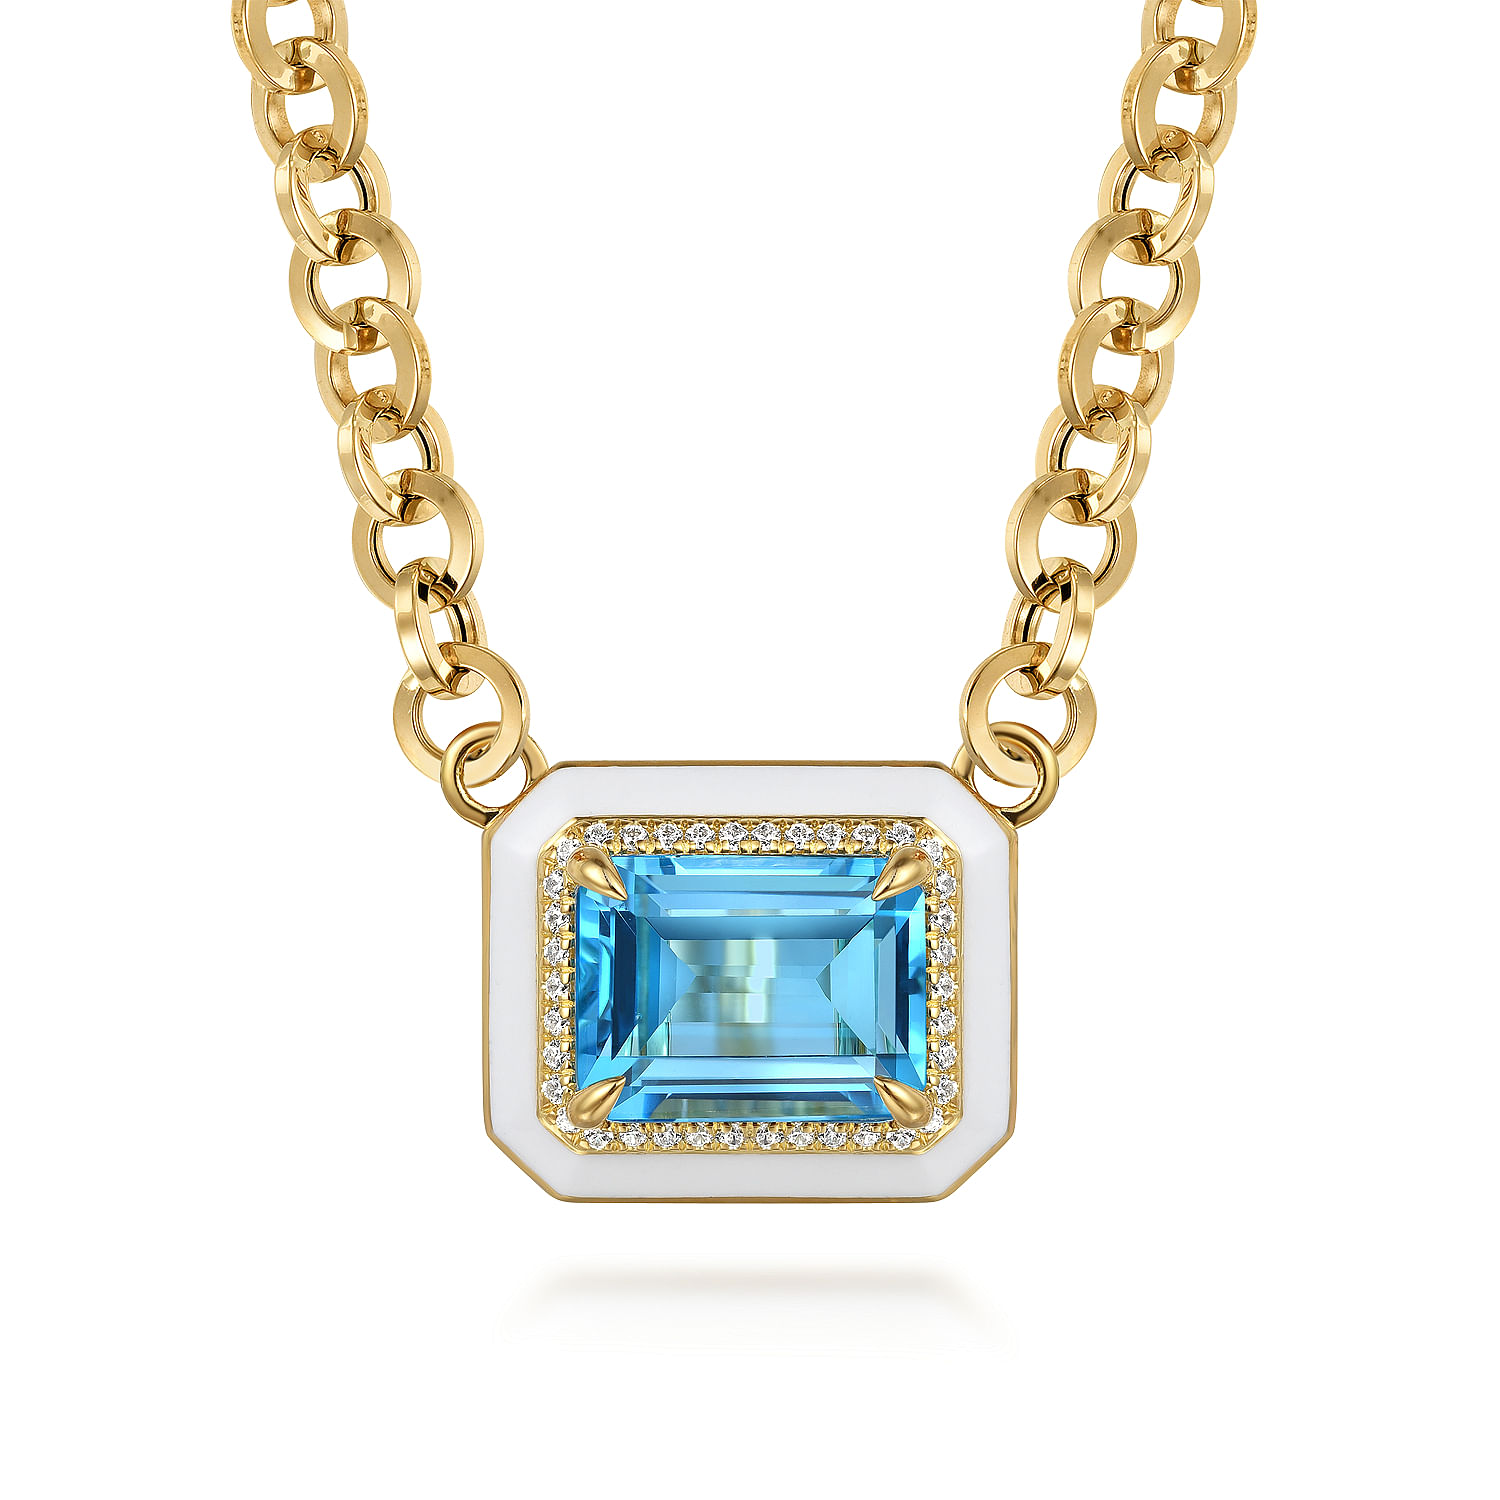 Gabriel - 14K Yellow Gold Diamond and Blue Topaz Emerald Cut Necklace With Flower Pattern J-Back and White Enamel